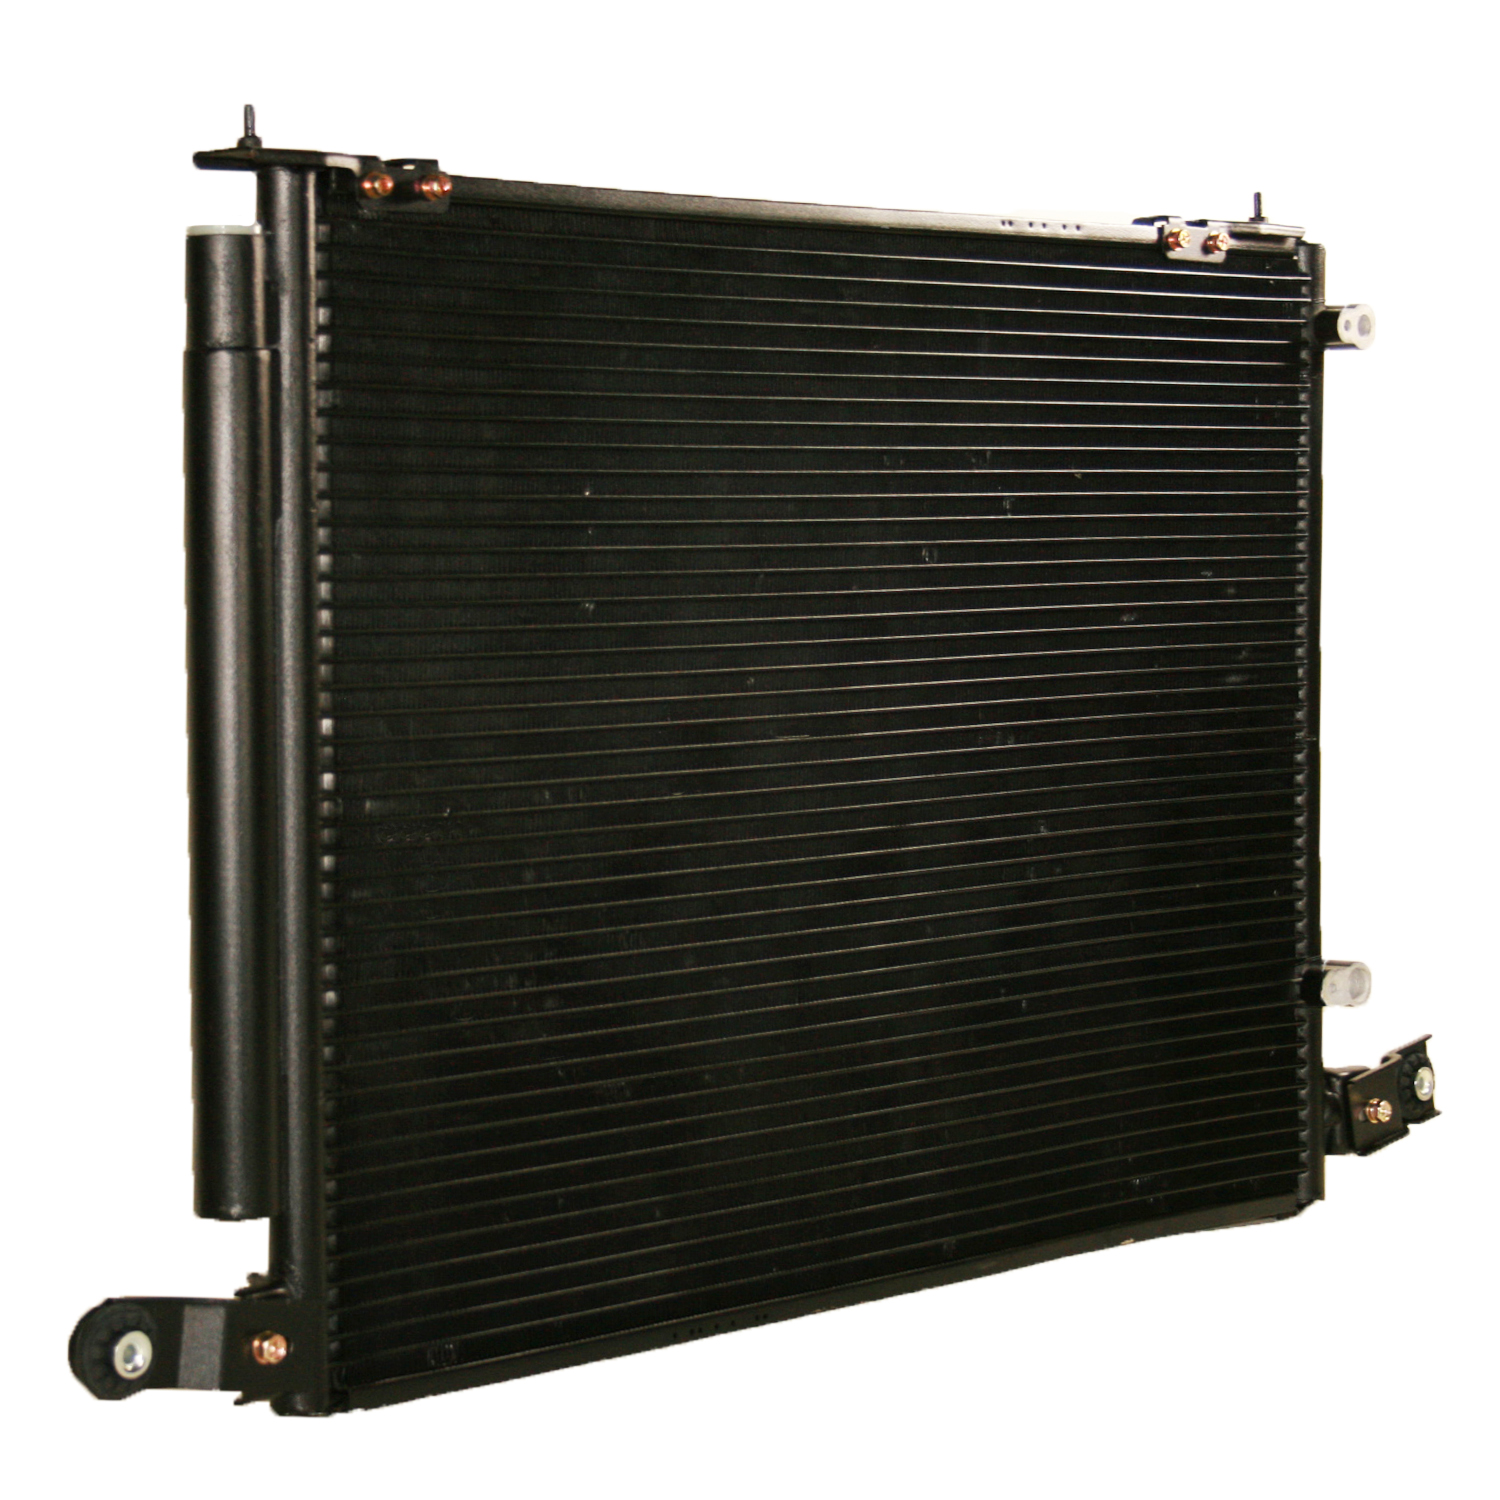 TCW Condenser 44-3081 New Product Image field_60b6a13a6e67c